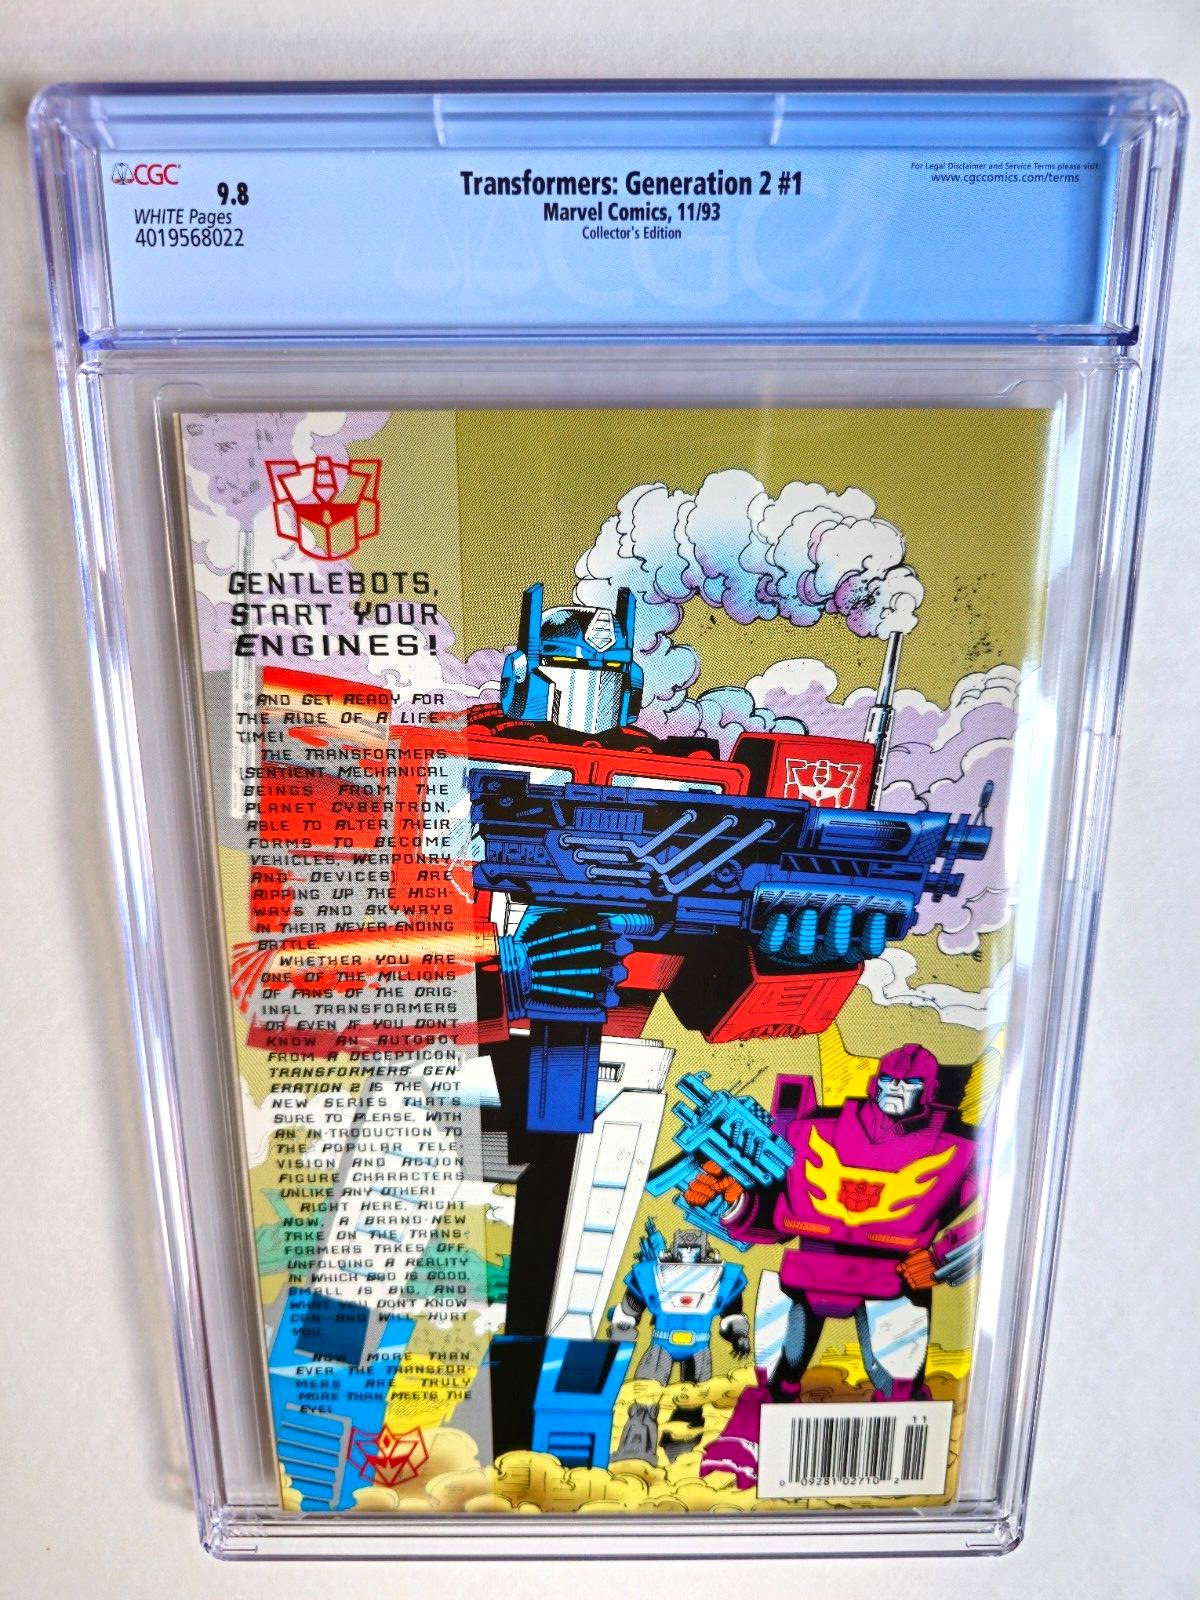 TRANSFORMERS: GENERATION 2 #1 CGC 9.8 + ULTRA-RARE DELUXE / NEWSSTAND VARIANT +